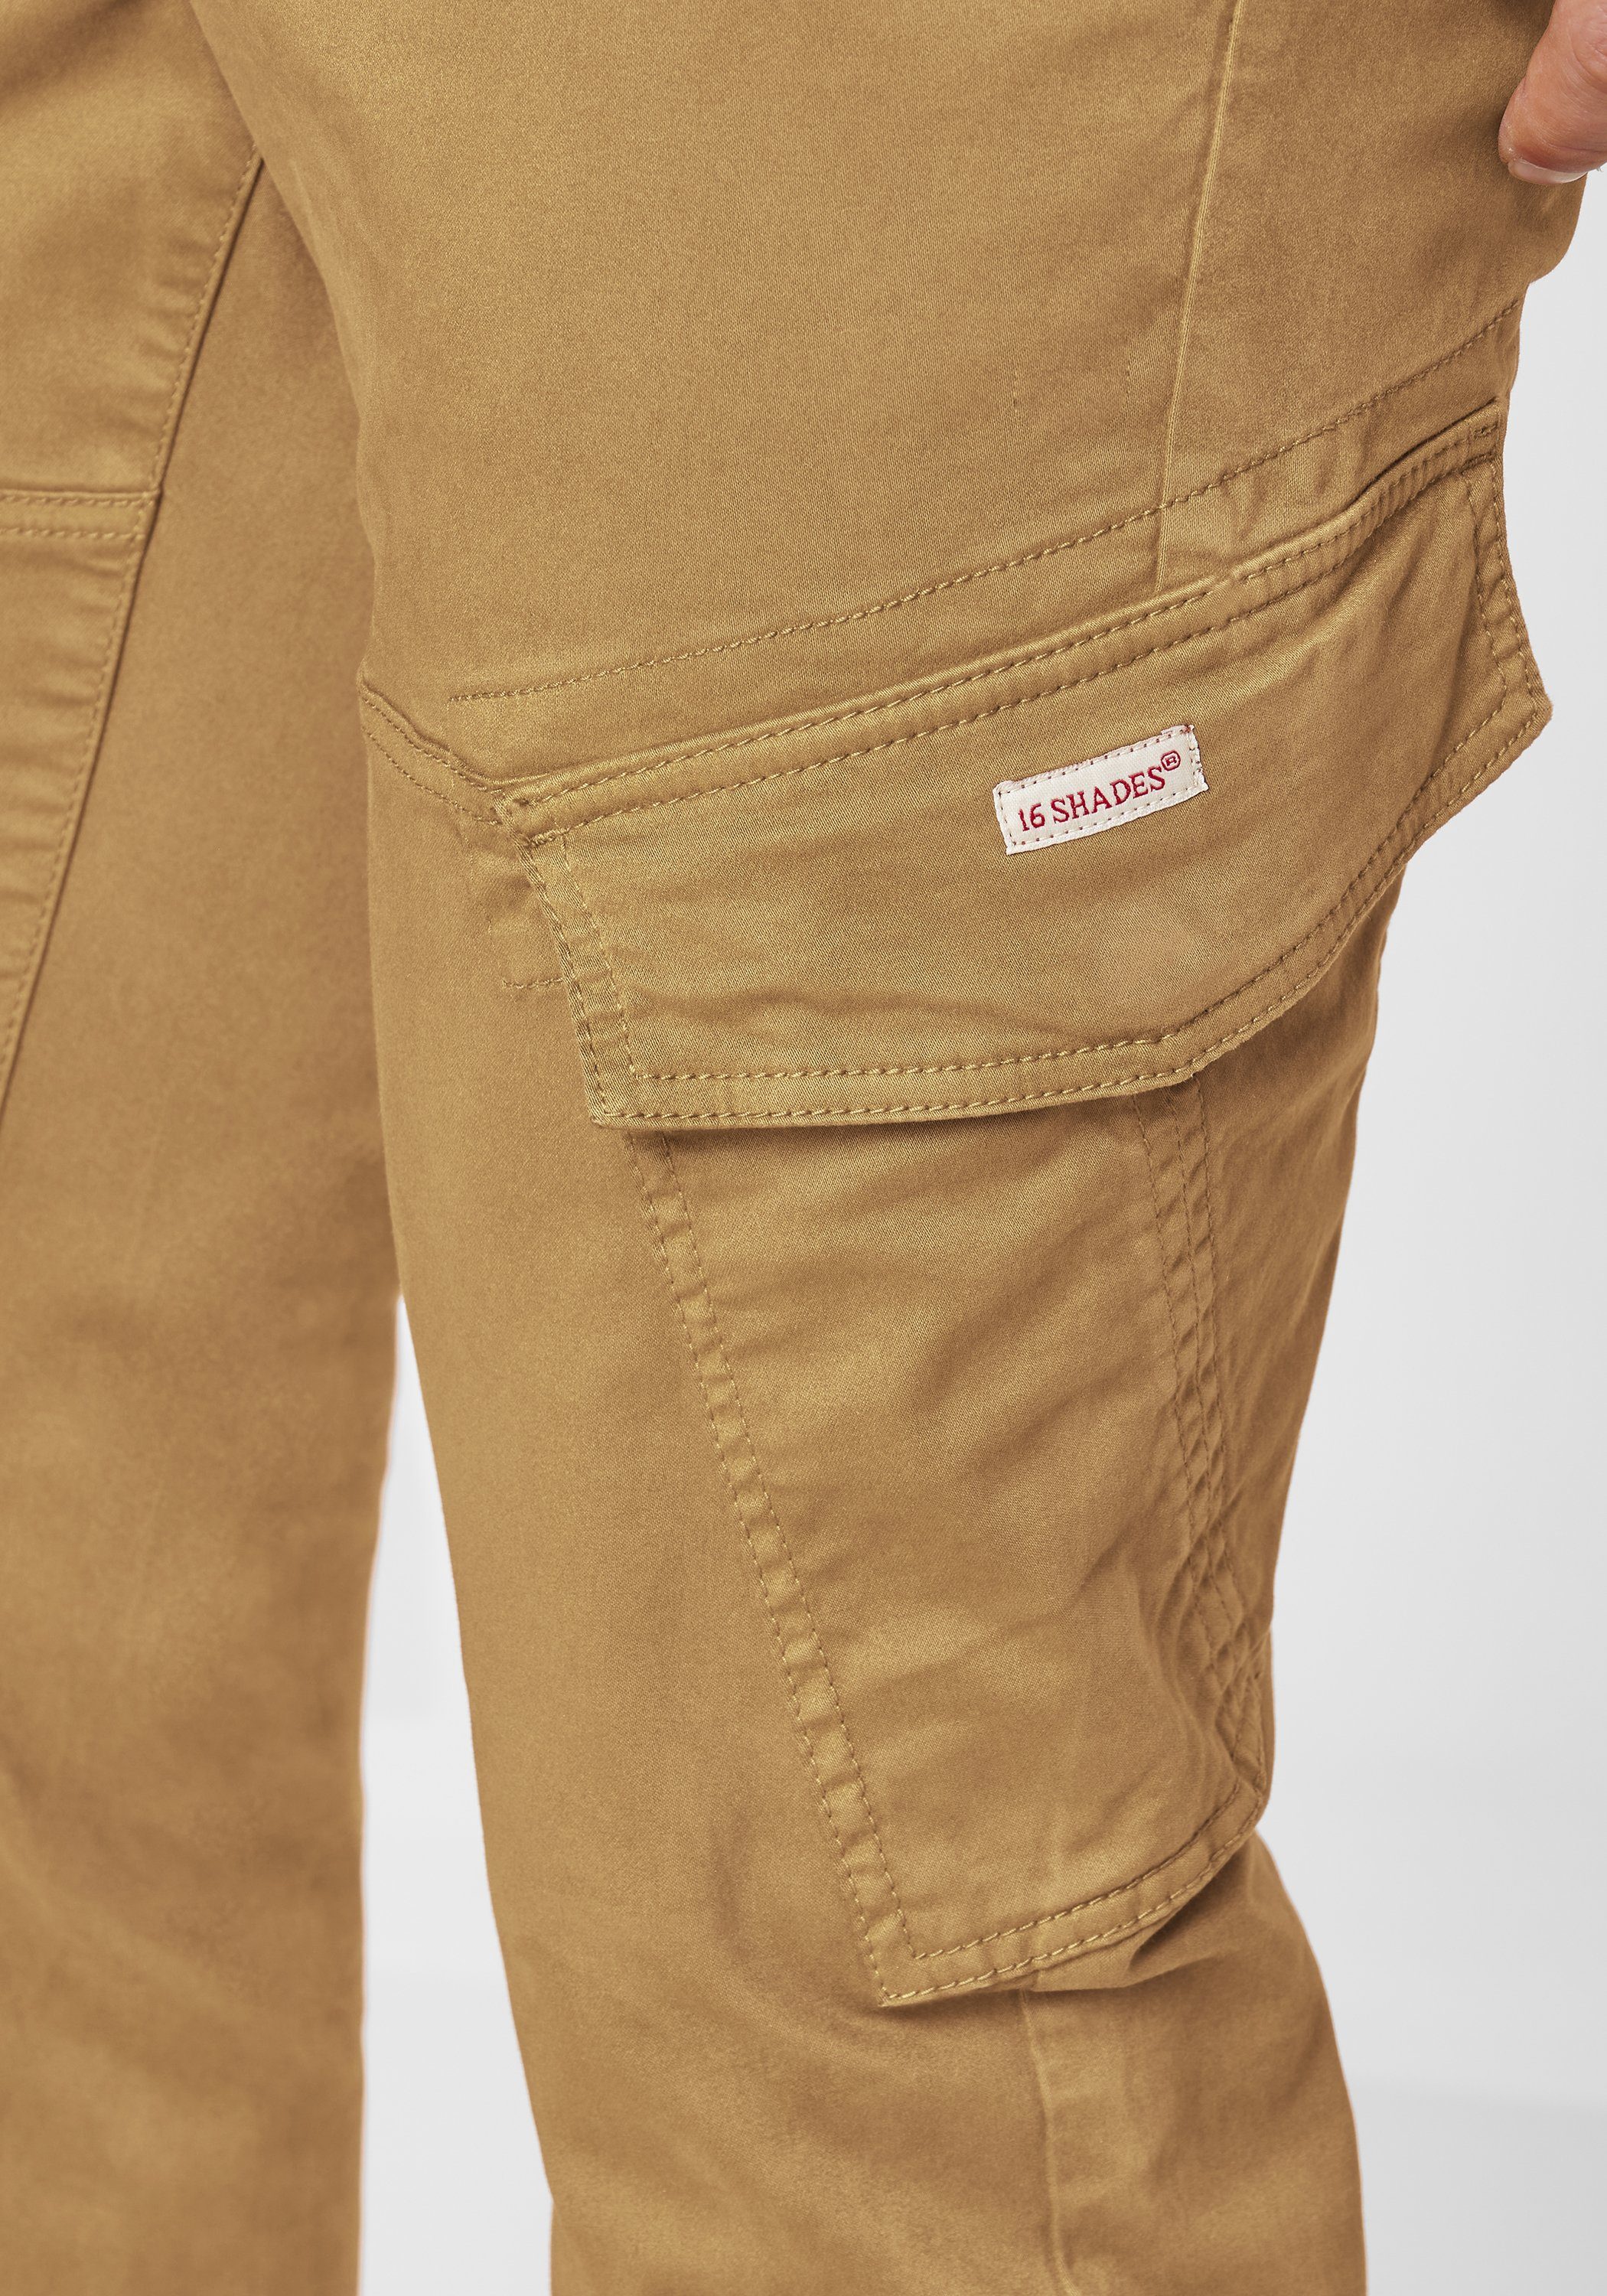 Redpoint Cargohose Fit Chinohose- Kingston Edition 16 camel Tapered Shades